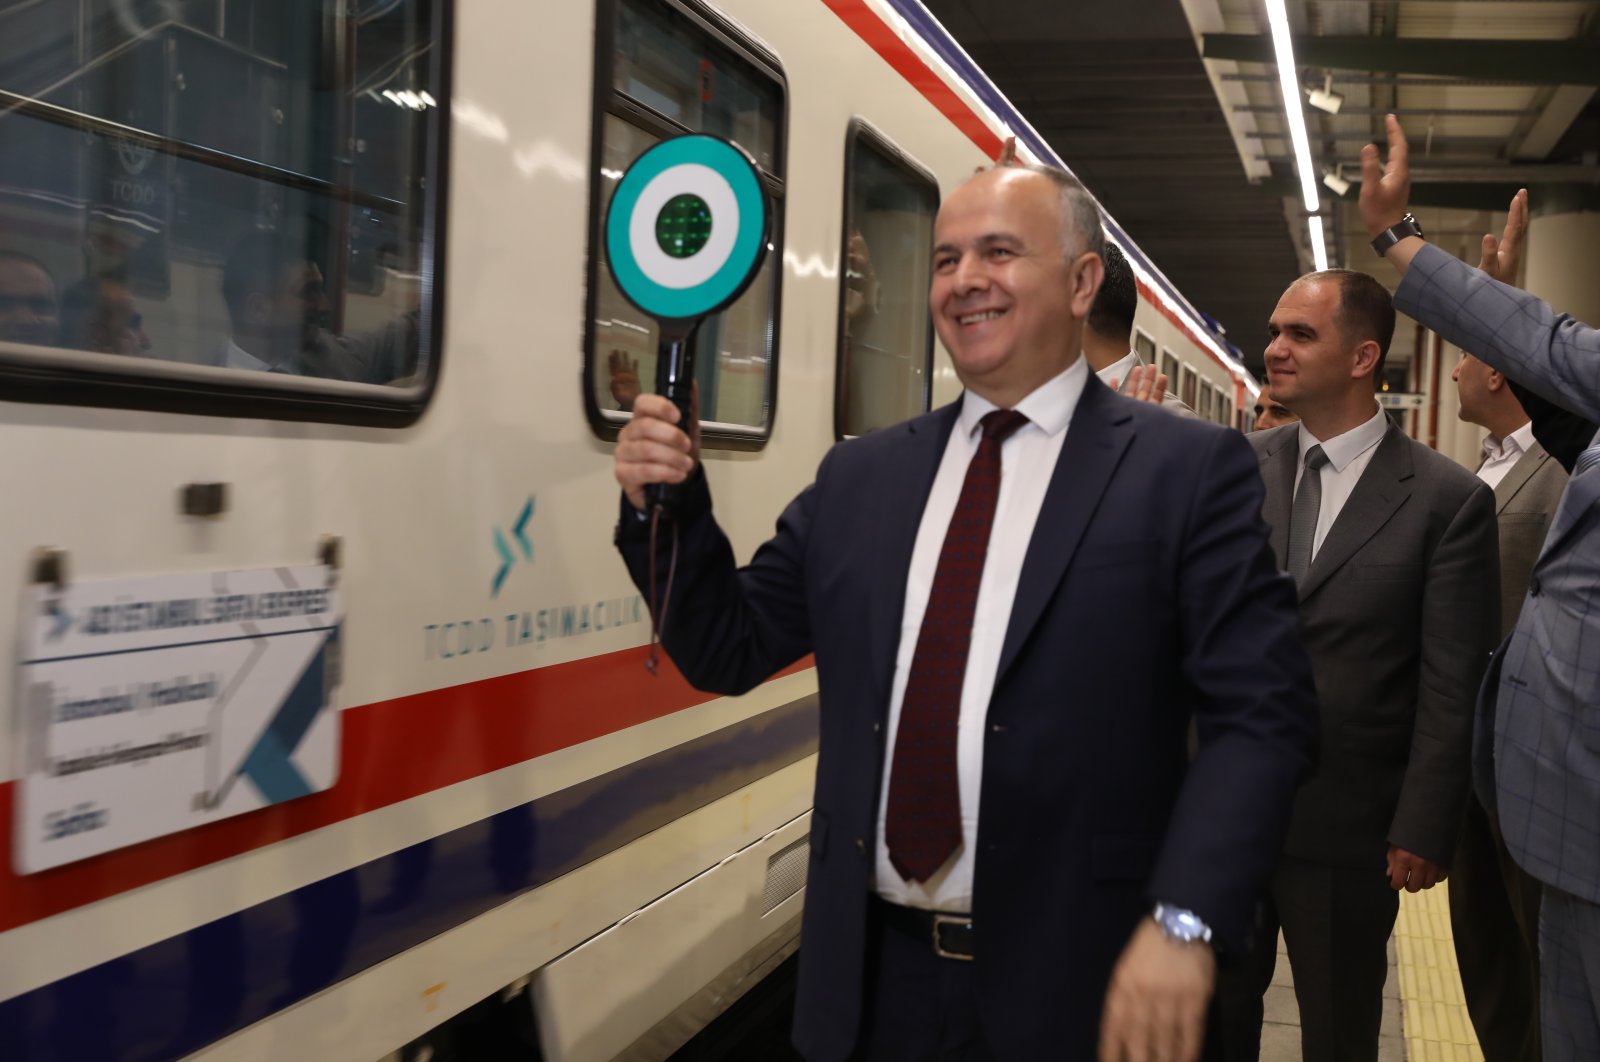 TCDD Transportation General Manager Hasan Pezük bids farewell to the train operating on the Istanbul-Sofia route in Istanbul, Turkey, April 26, 2022. (AA Photo)